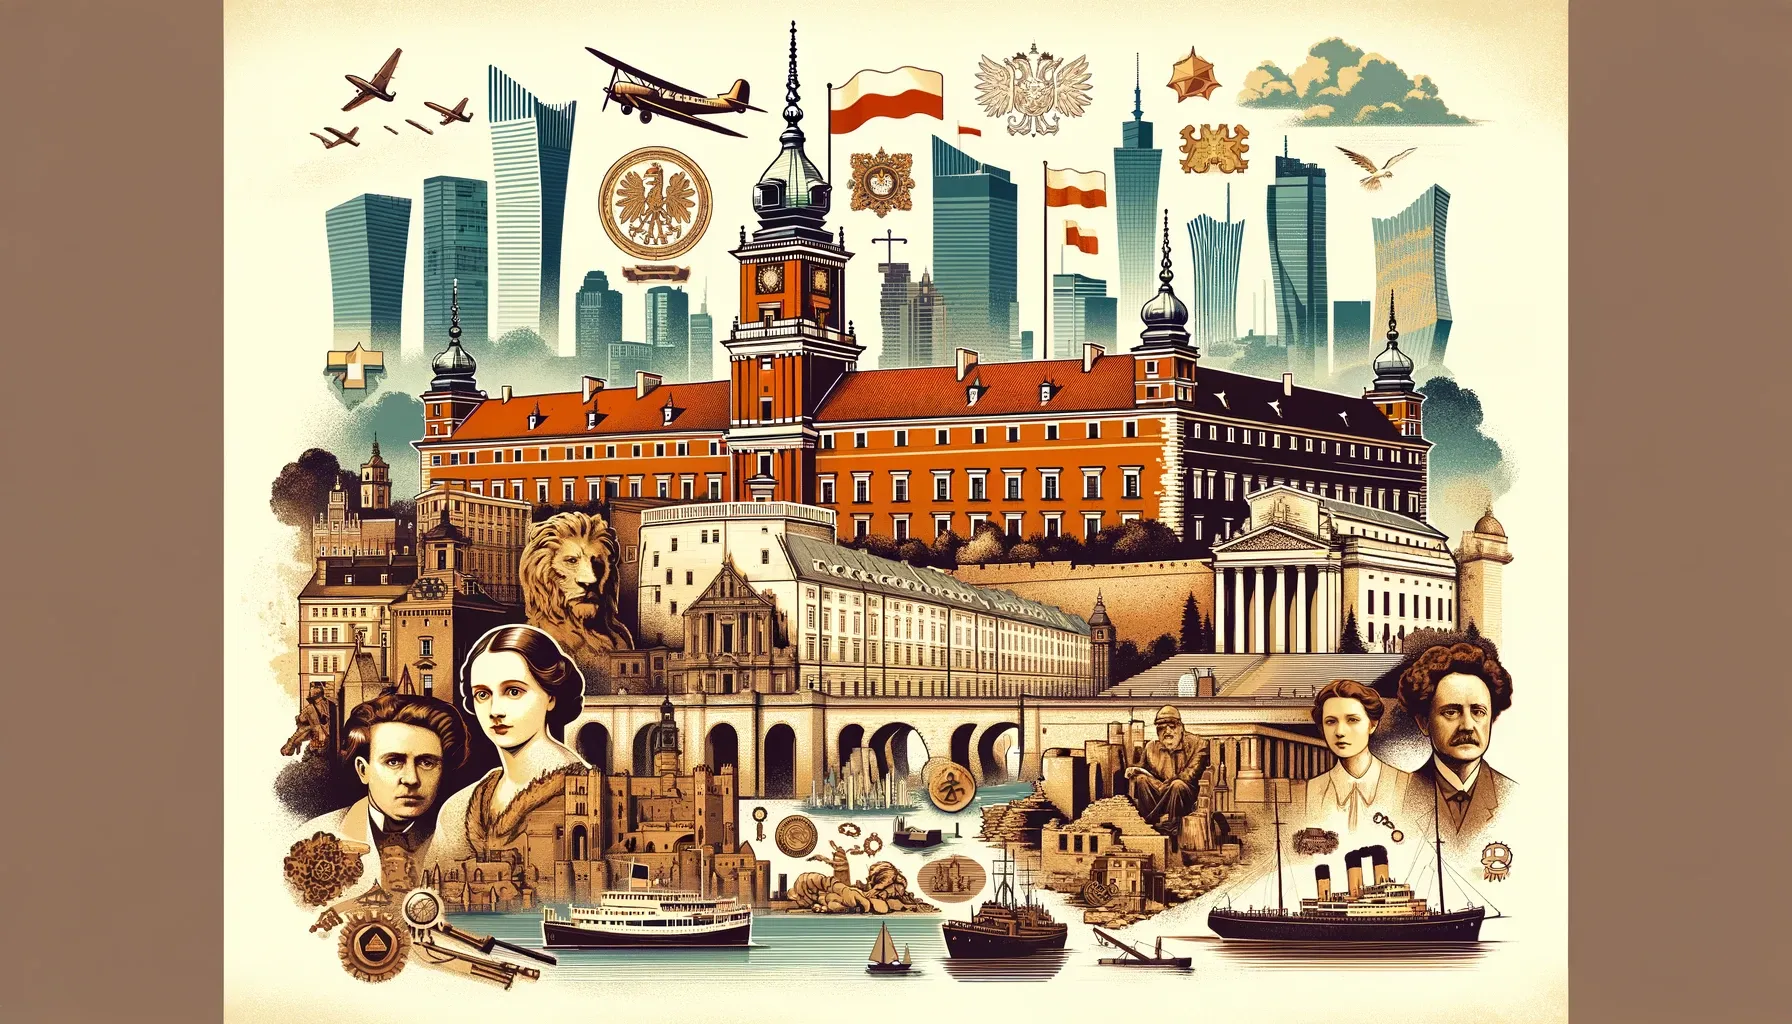 Warsaw: A City of Resilience and Charm